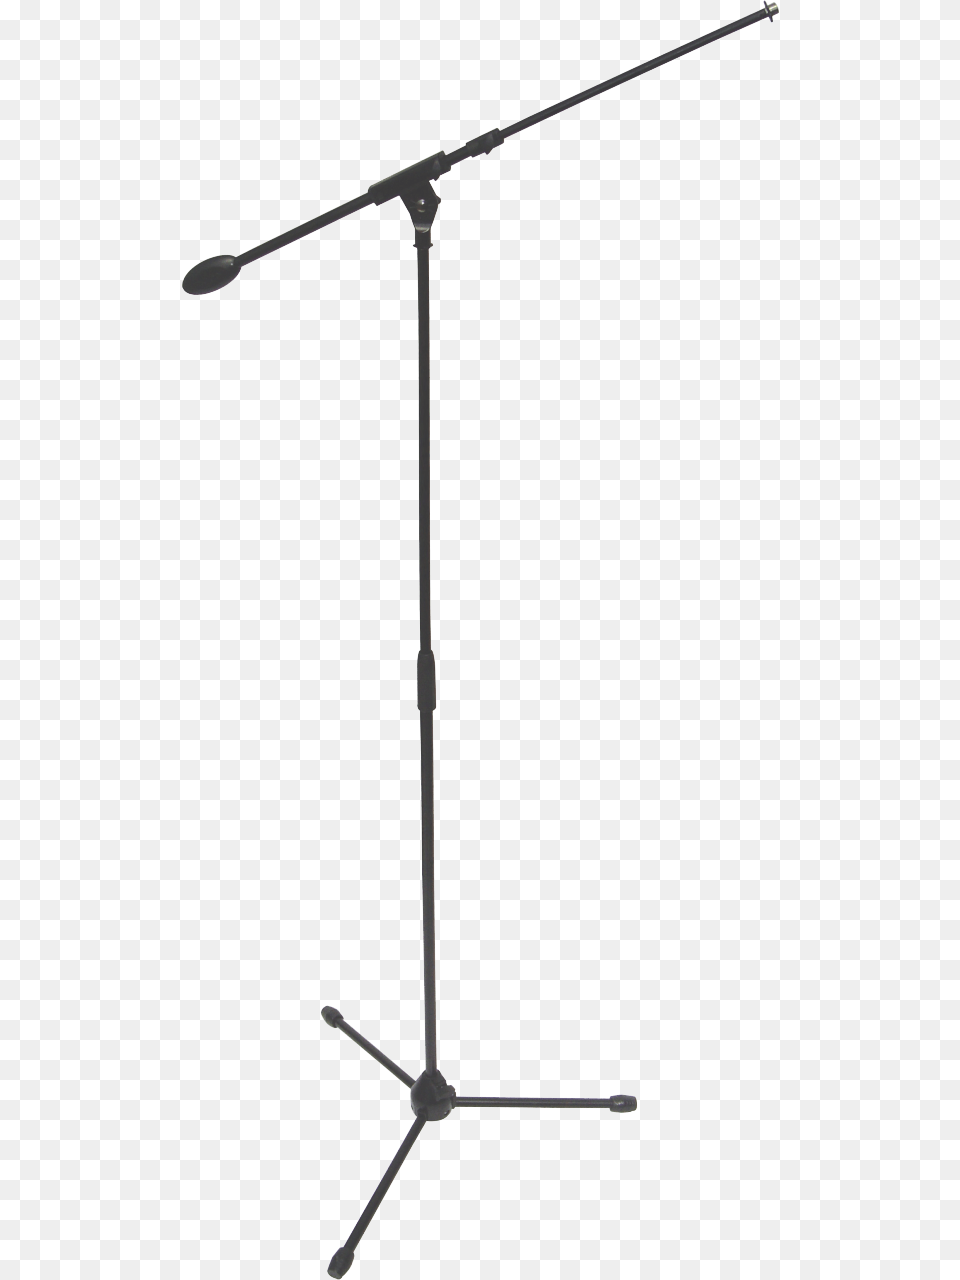 Microphone Stands Microphone Stand Icon, Electrical Device, Furniture Free Png Download